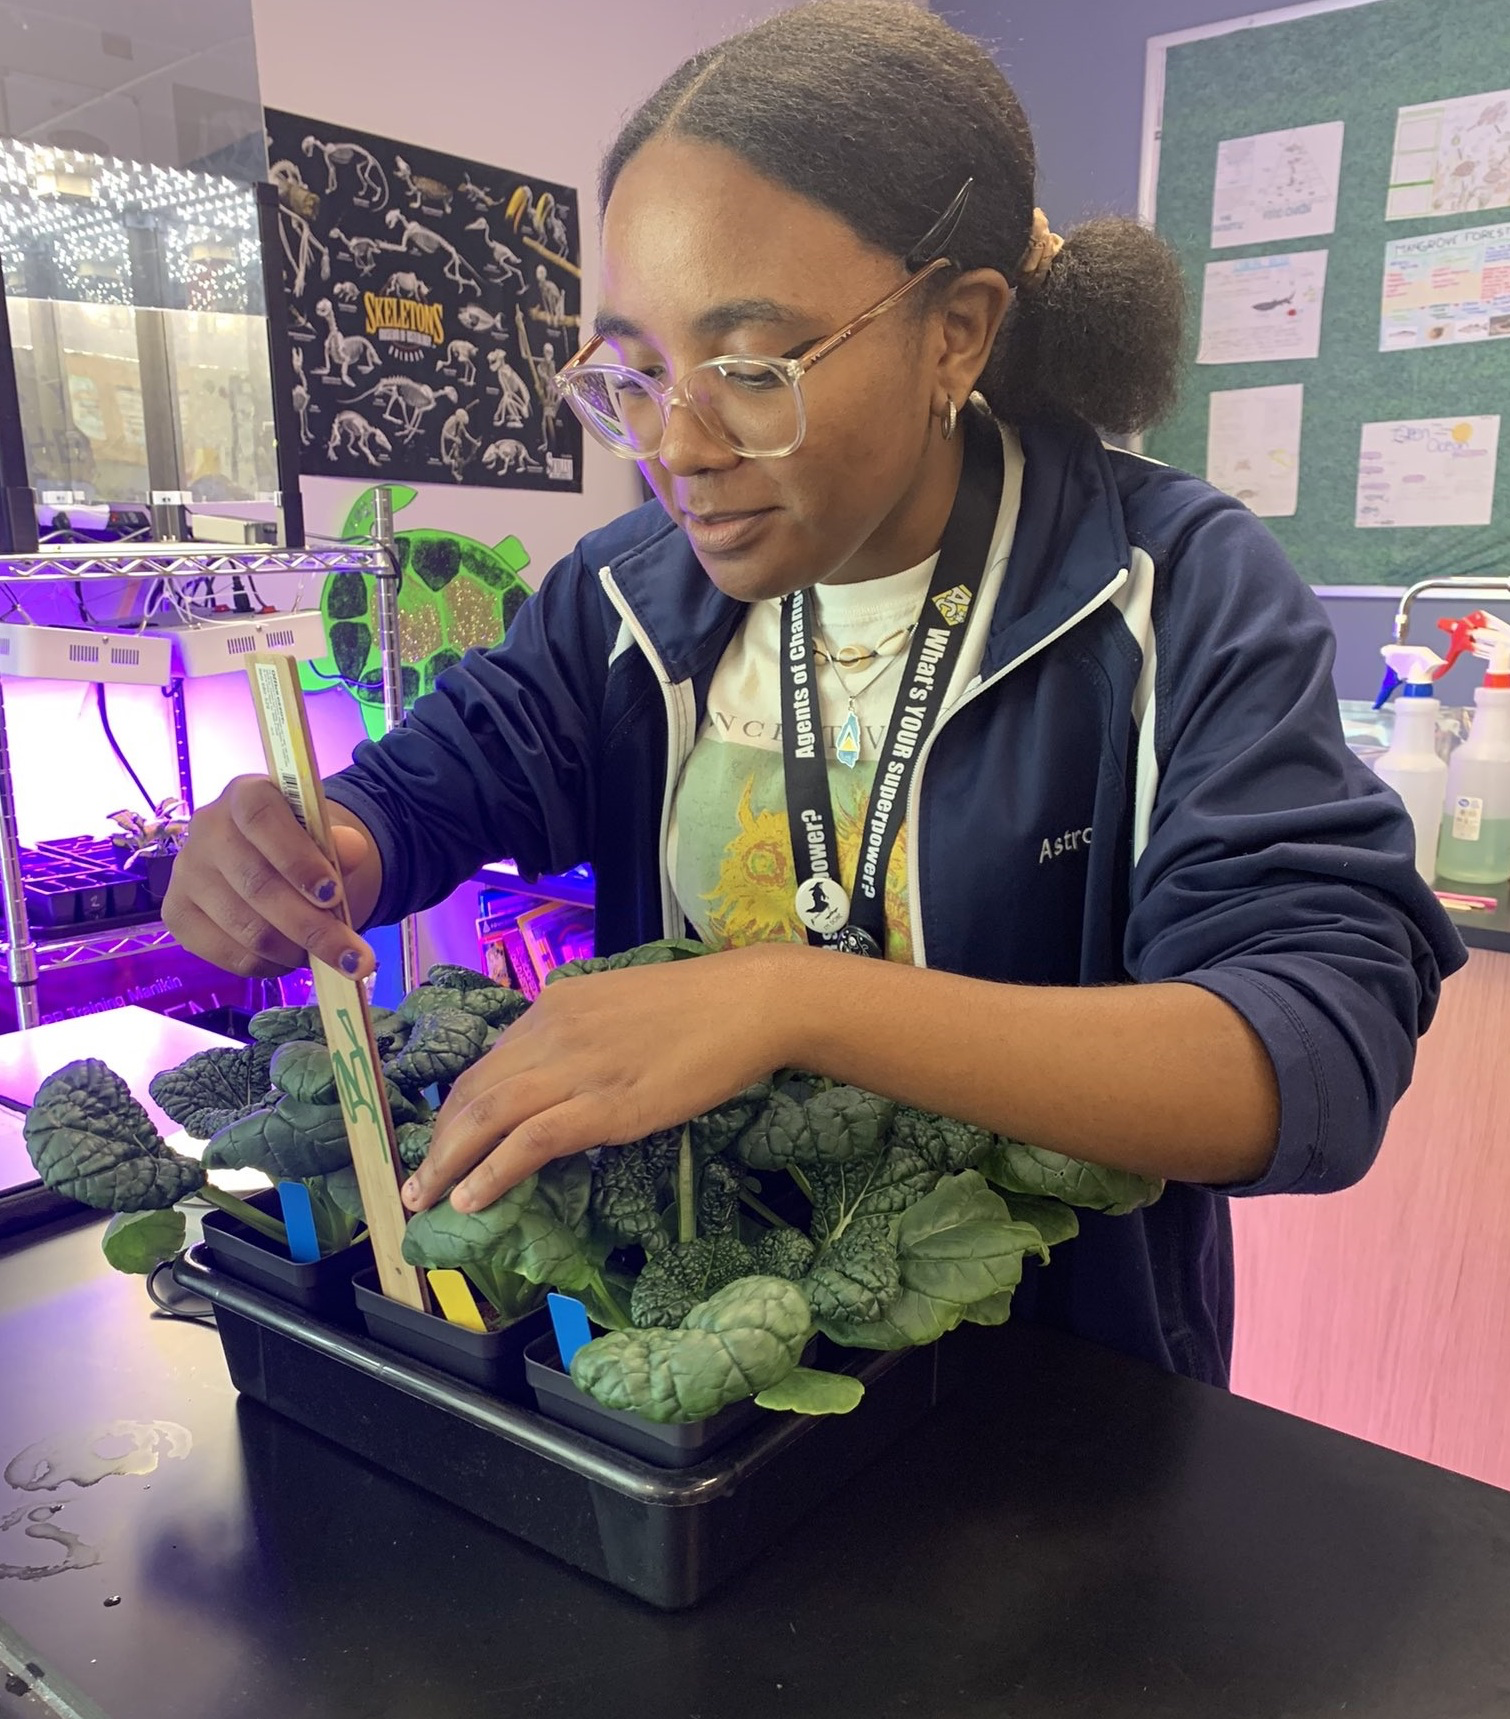 A young scientist is measuring the growth of plants in a laboratory setting. She is wearing glasses, a navy blue jacket, and a lanyard around her neck. She uses a wooden ruler to measure the height of leafy green plants growing in a black tray under bright LED lights. The background shows various scientific posters and equipment, including a shelf with additional plants and grow lights.